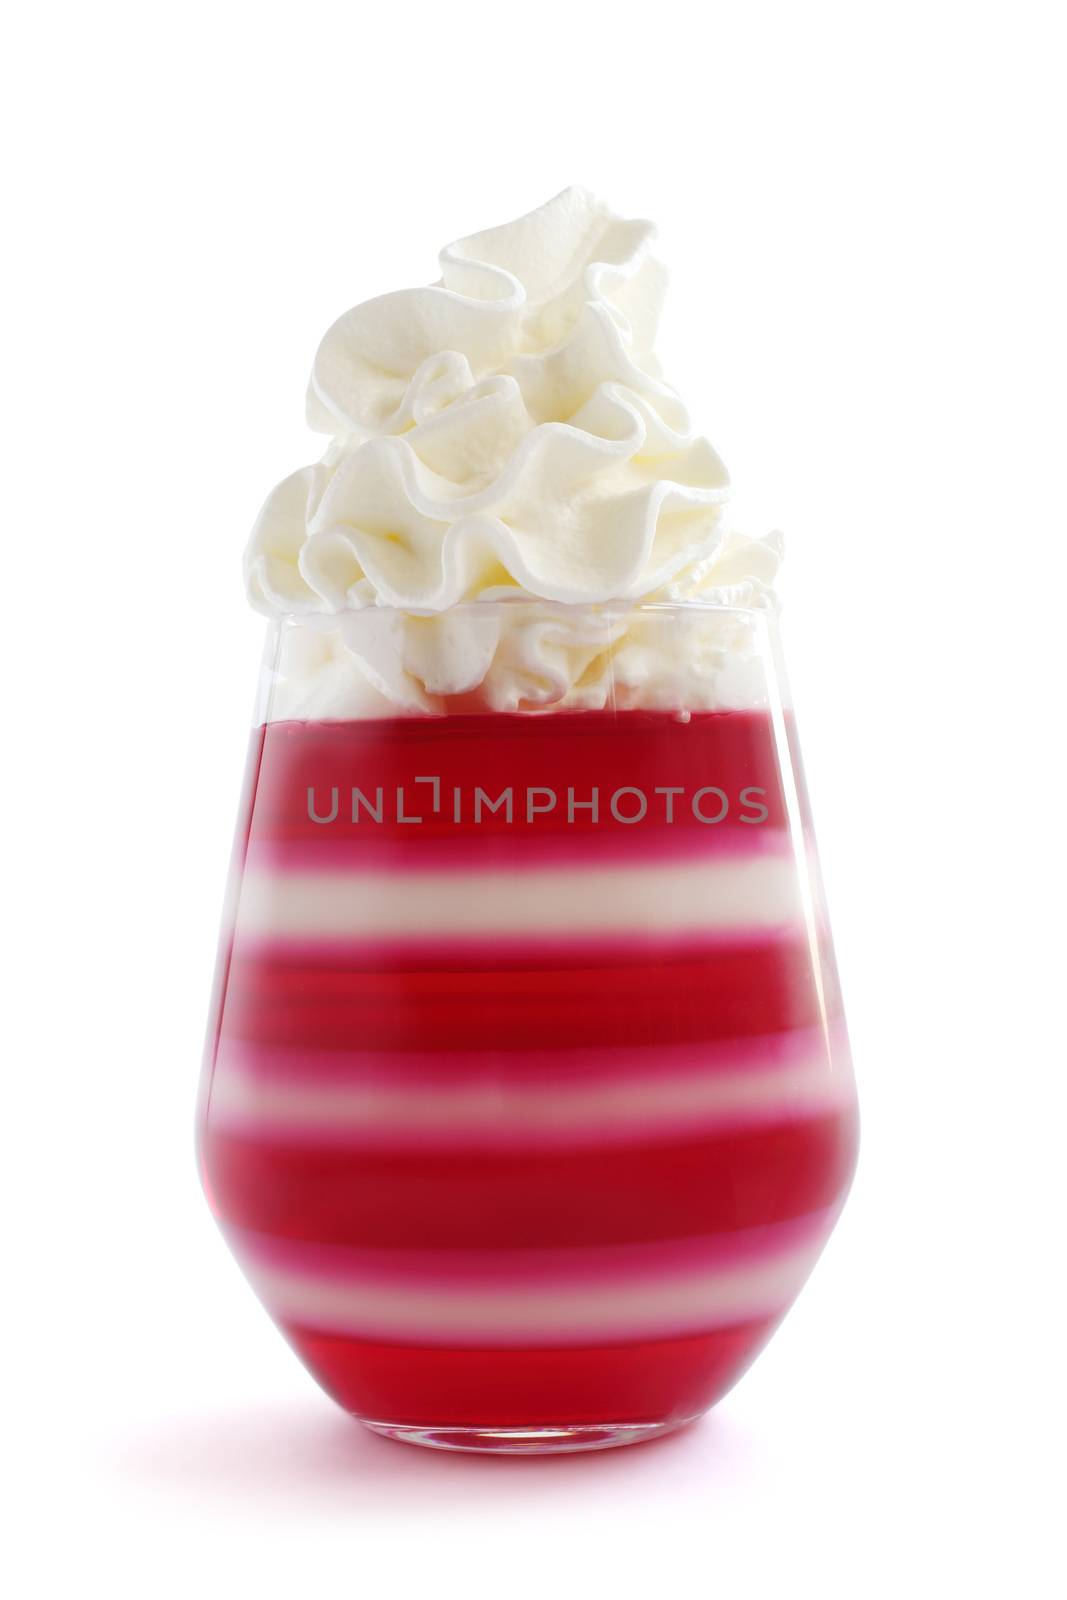 Red striped jello dessert in glass with whipped cream on top isolated on white background